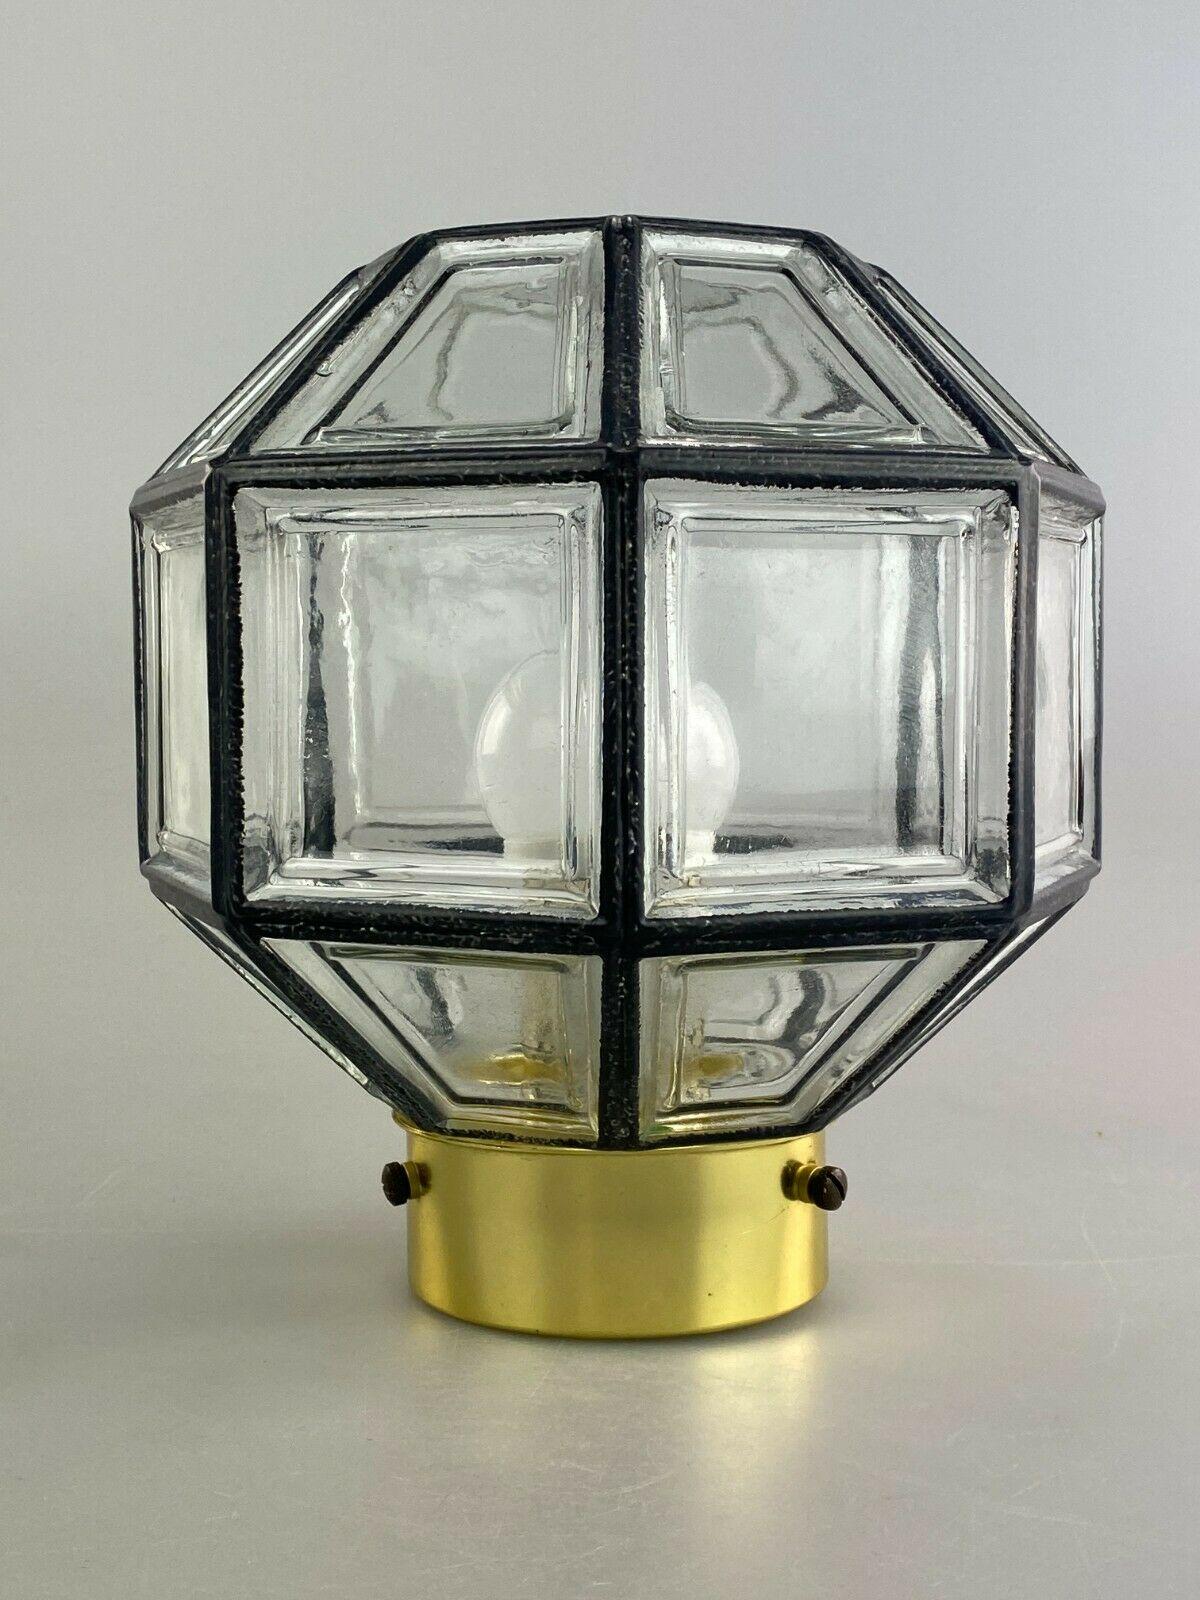 60s 70s lamp light ceiling lamp Limburg glass space age design 60s 70s

Object: ceiling lamp

Manufacturer: Glashütte Limburg

Condition: good

Age: around 1960-1970

Dimensions:

Diameter = 21.5cm
Height = 23cm

Other notes:

The